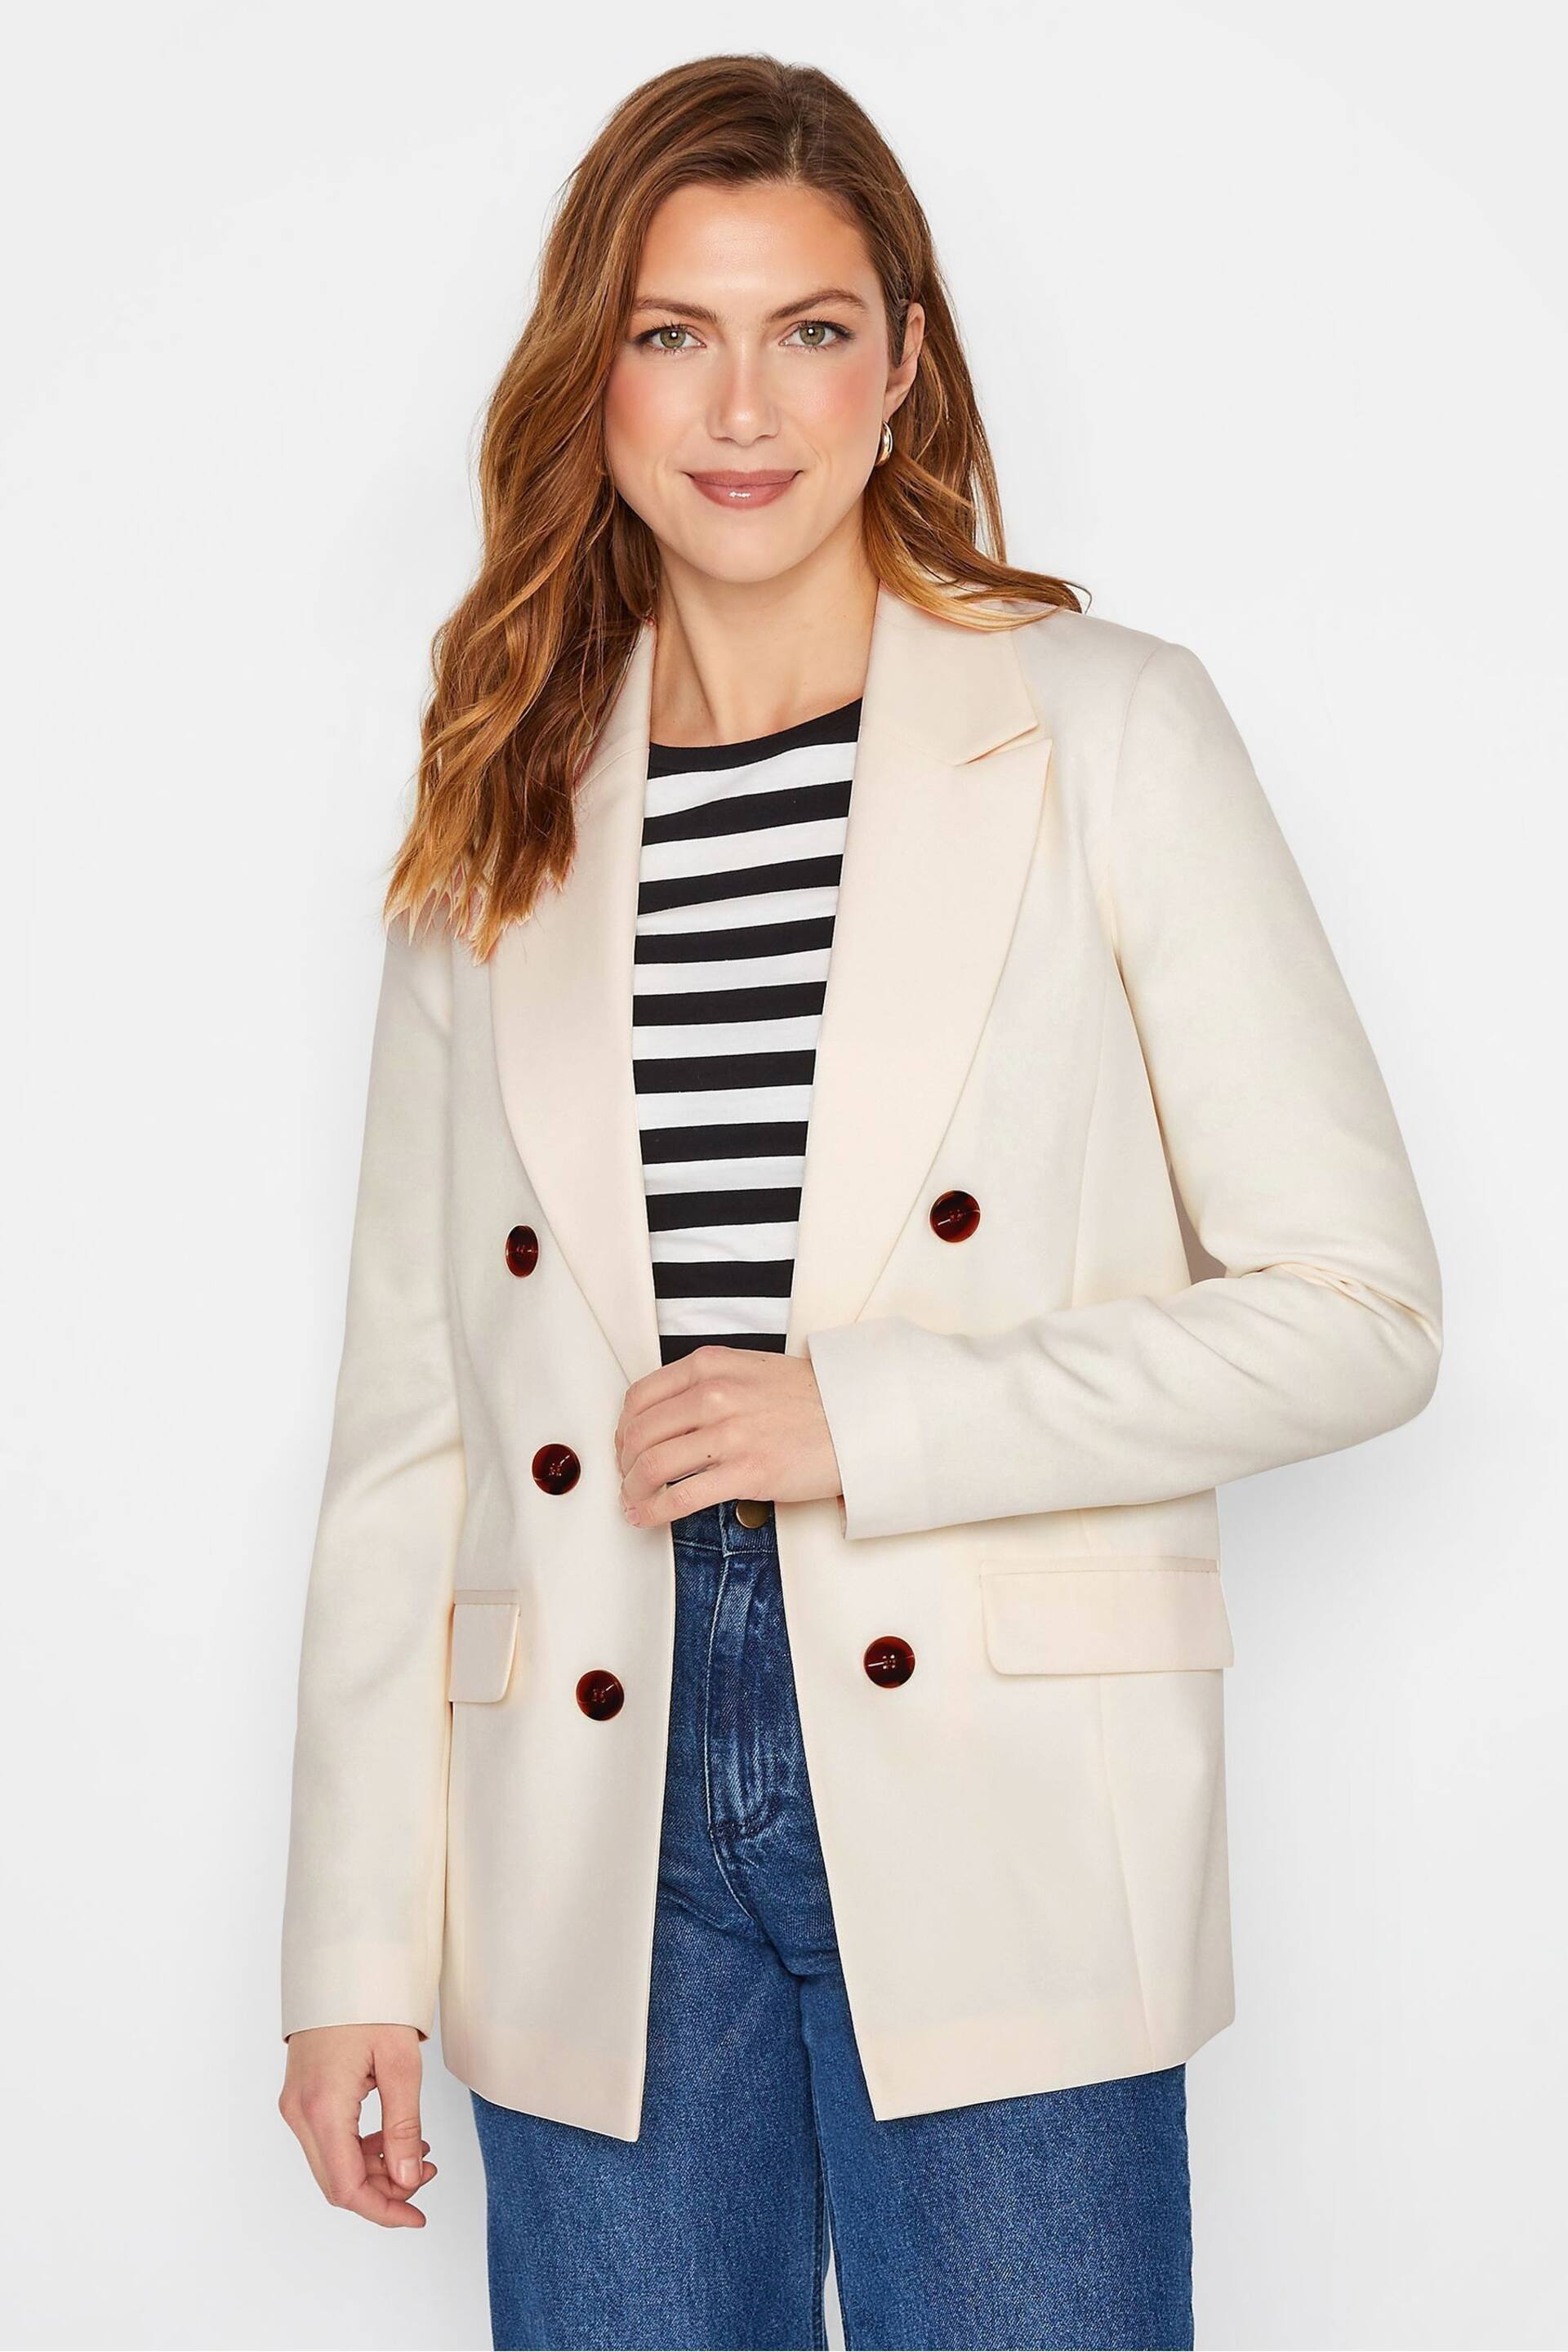 Long Tall Sally Cream Double Breasted Blazer - Image 1 of 4